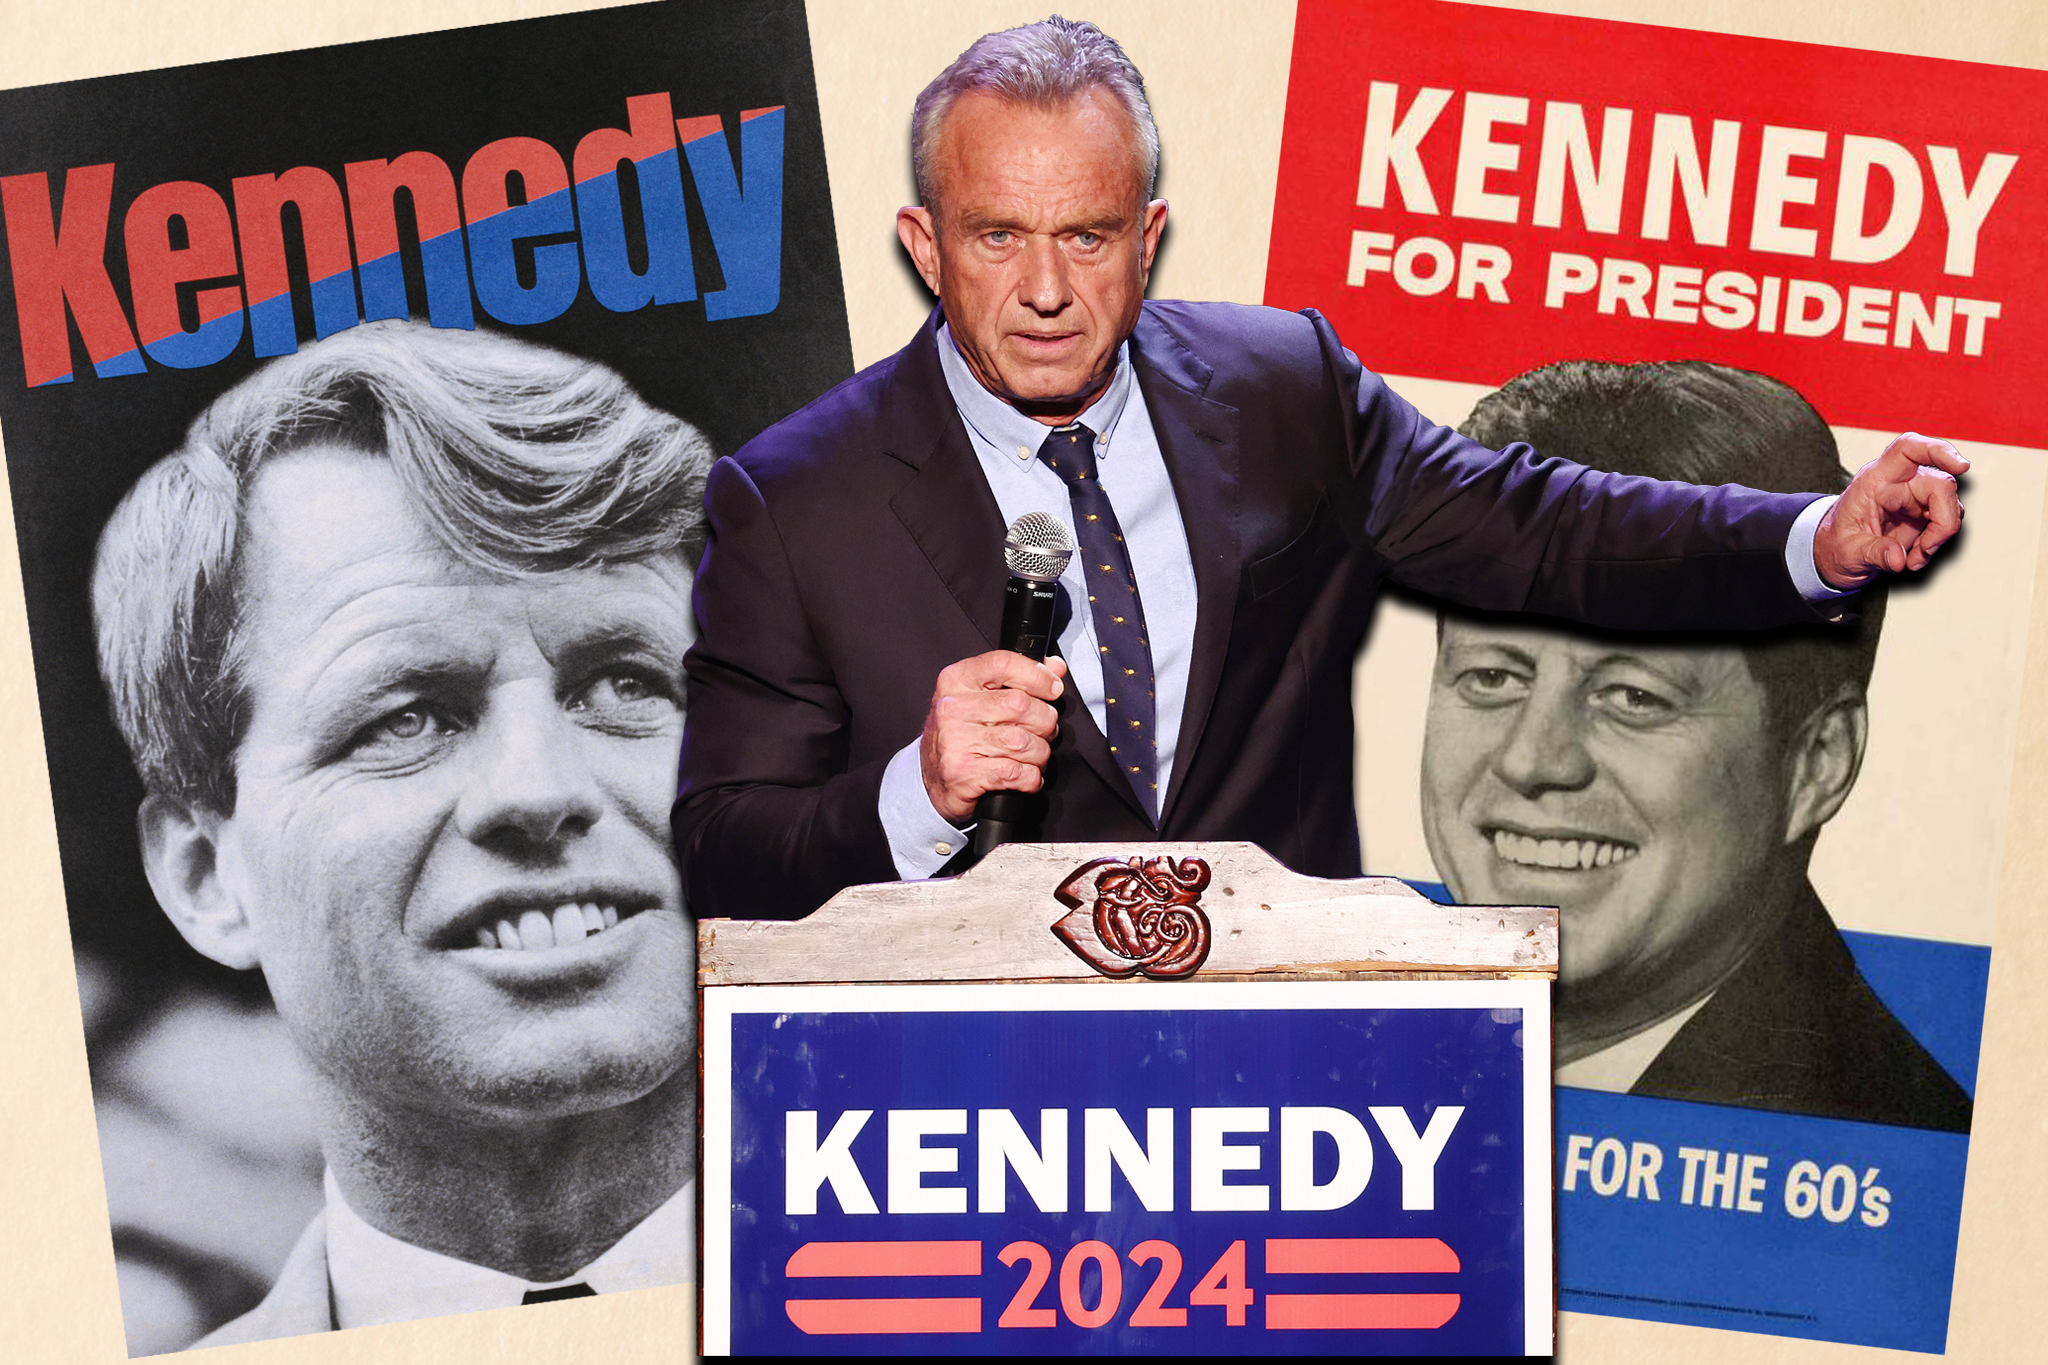 The Kennedy family has more or less disowned everything to do with RFK Jr’s campaign